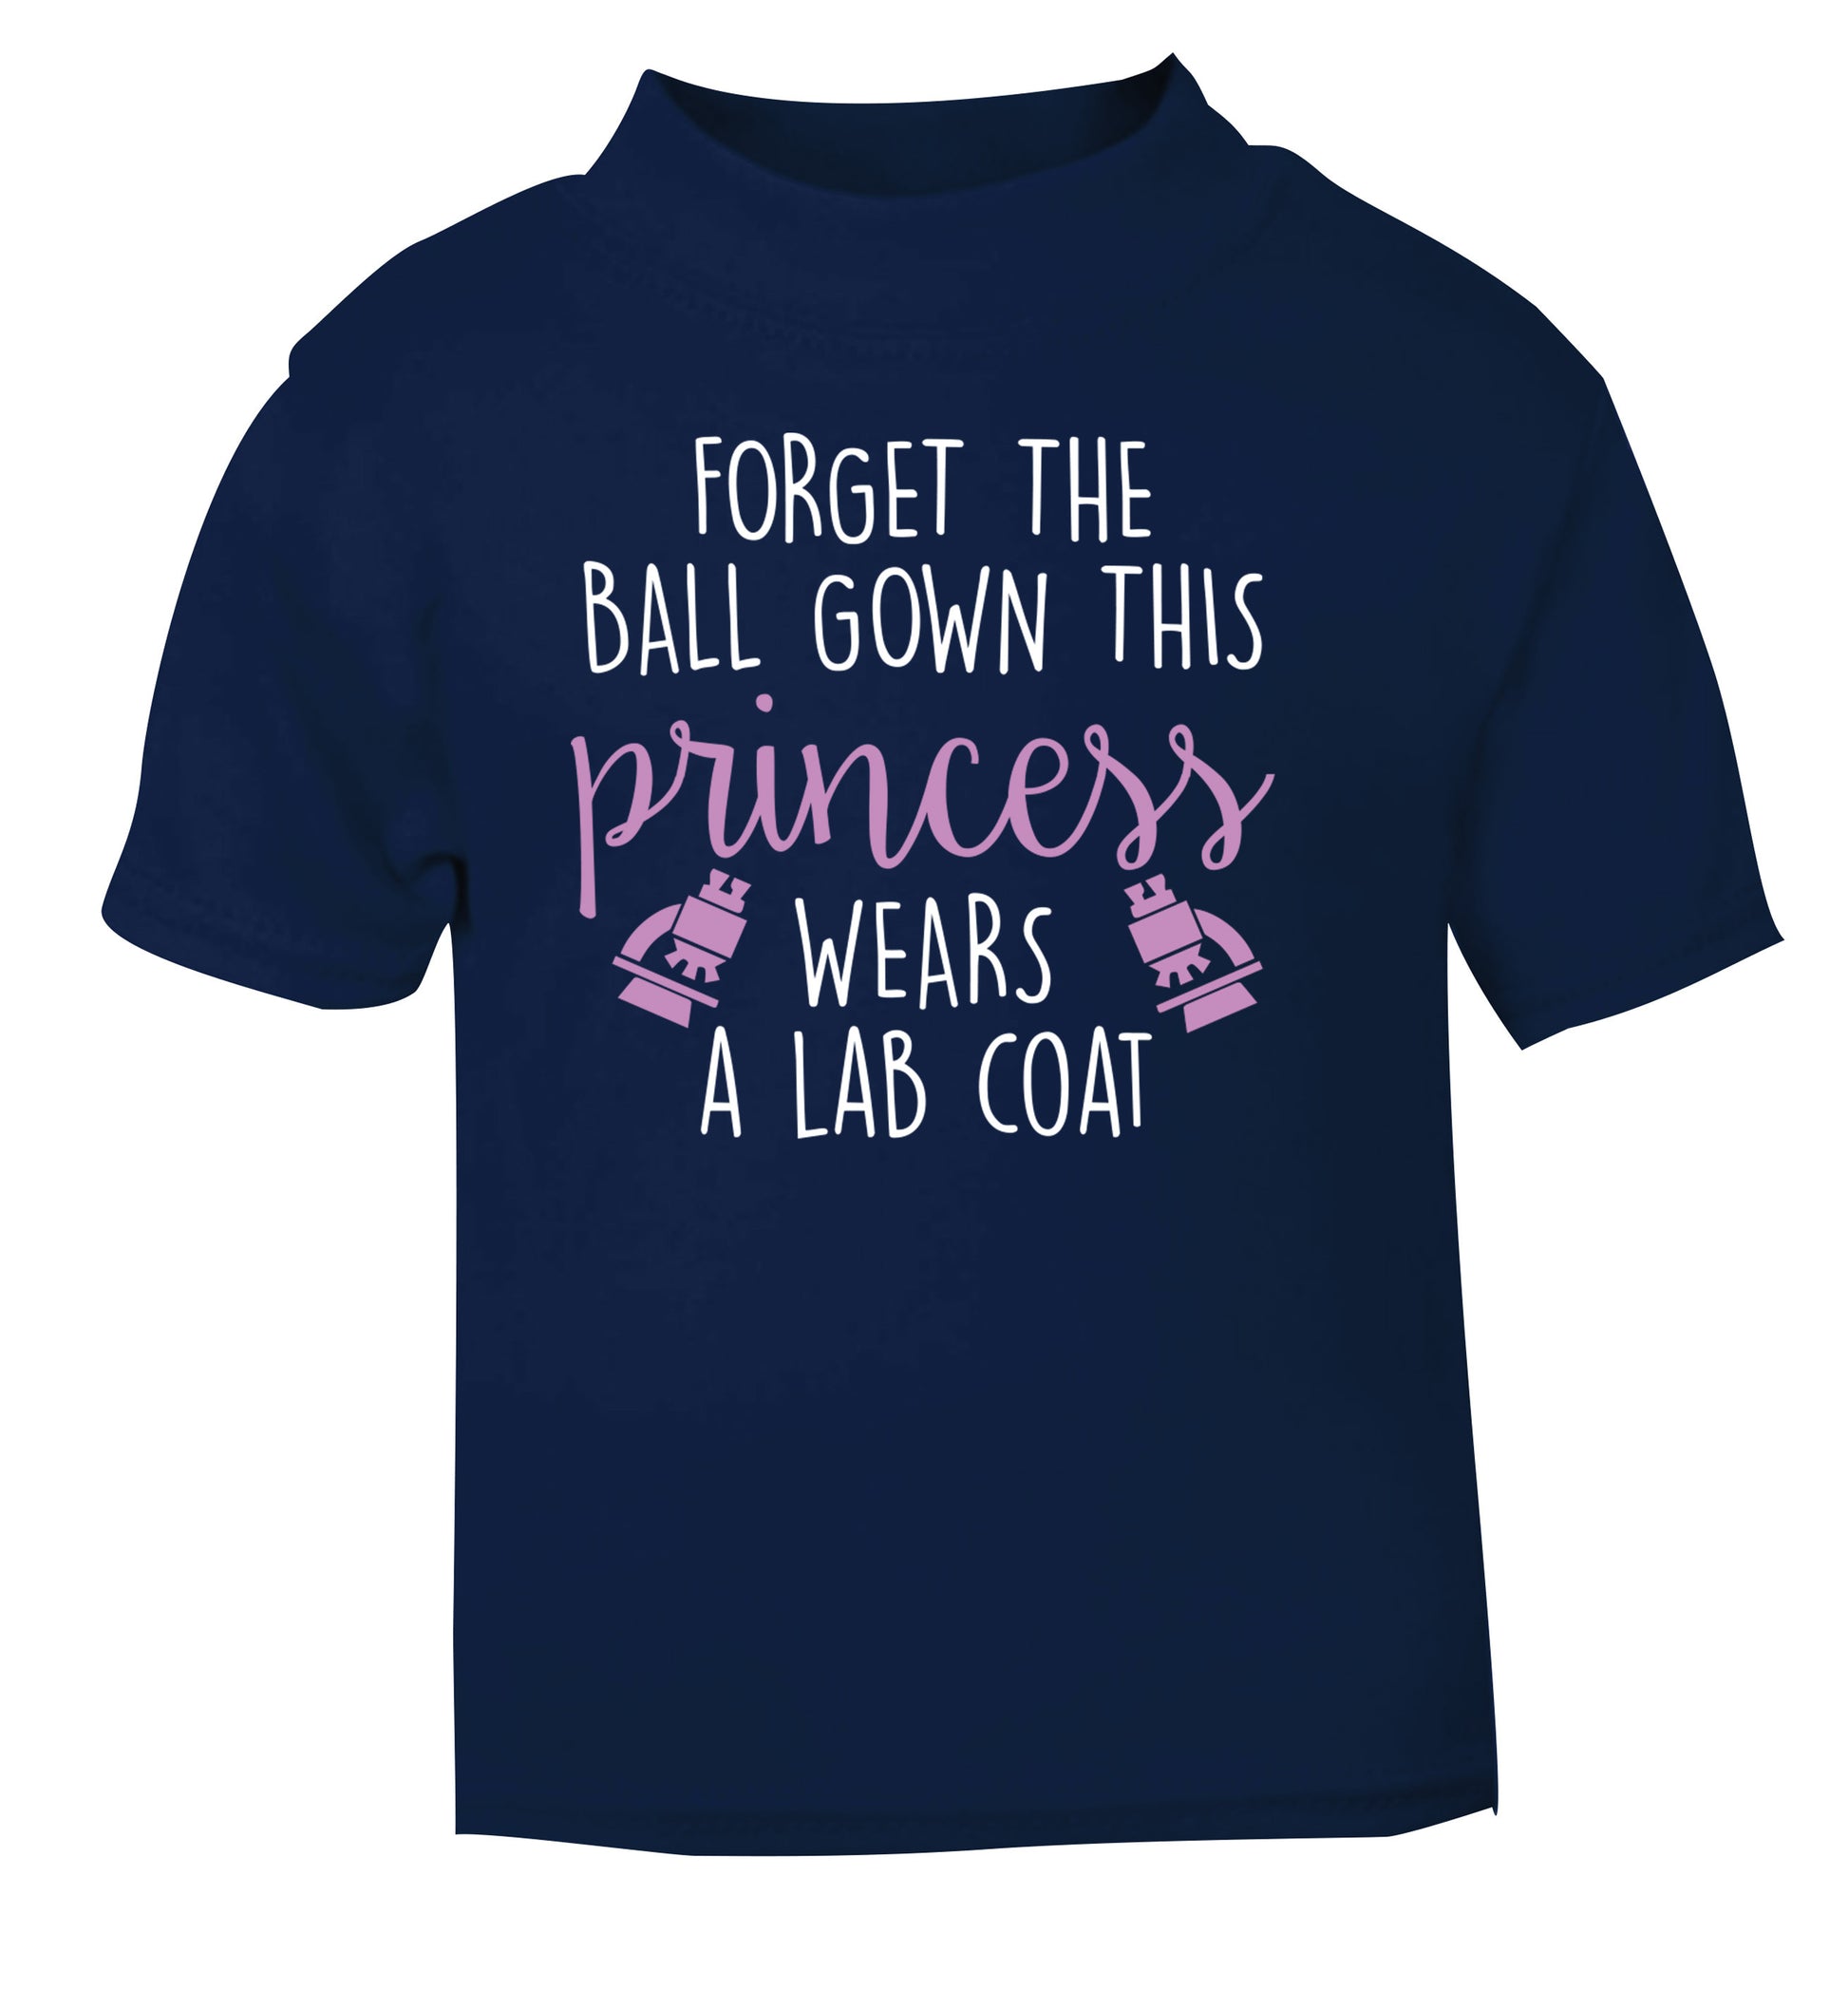 Forget the ball gown this princess wears a lab coat navy Baby Toddler Tshirt 2 Years